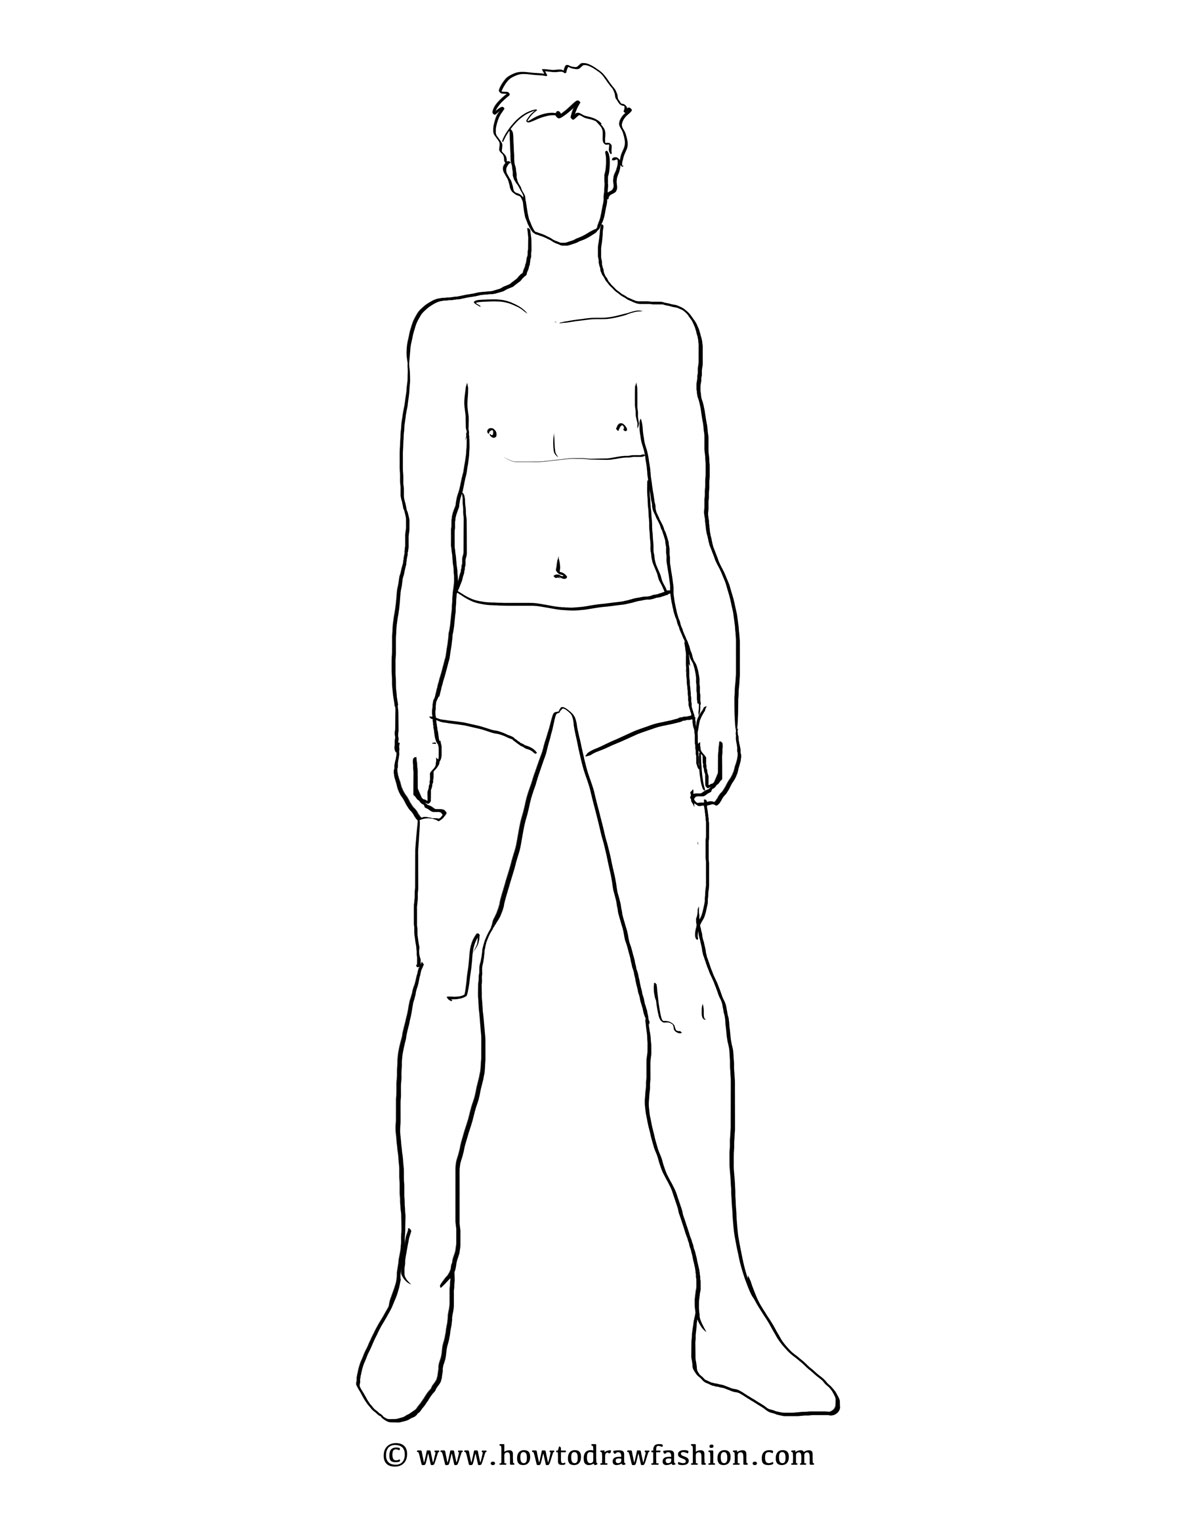 male-body-drawing-template-at-paintingvalley-explore-collection